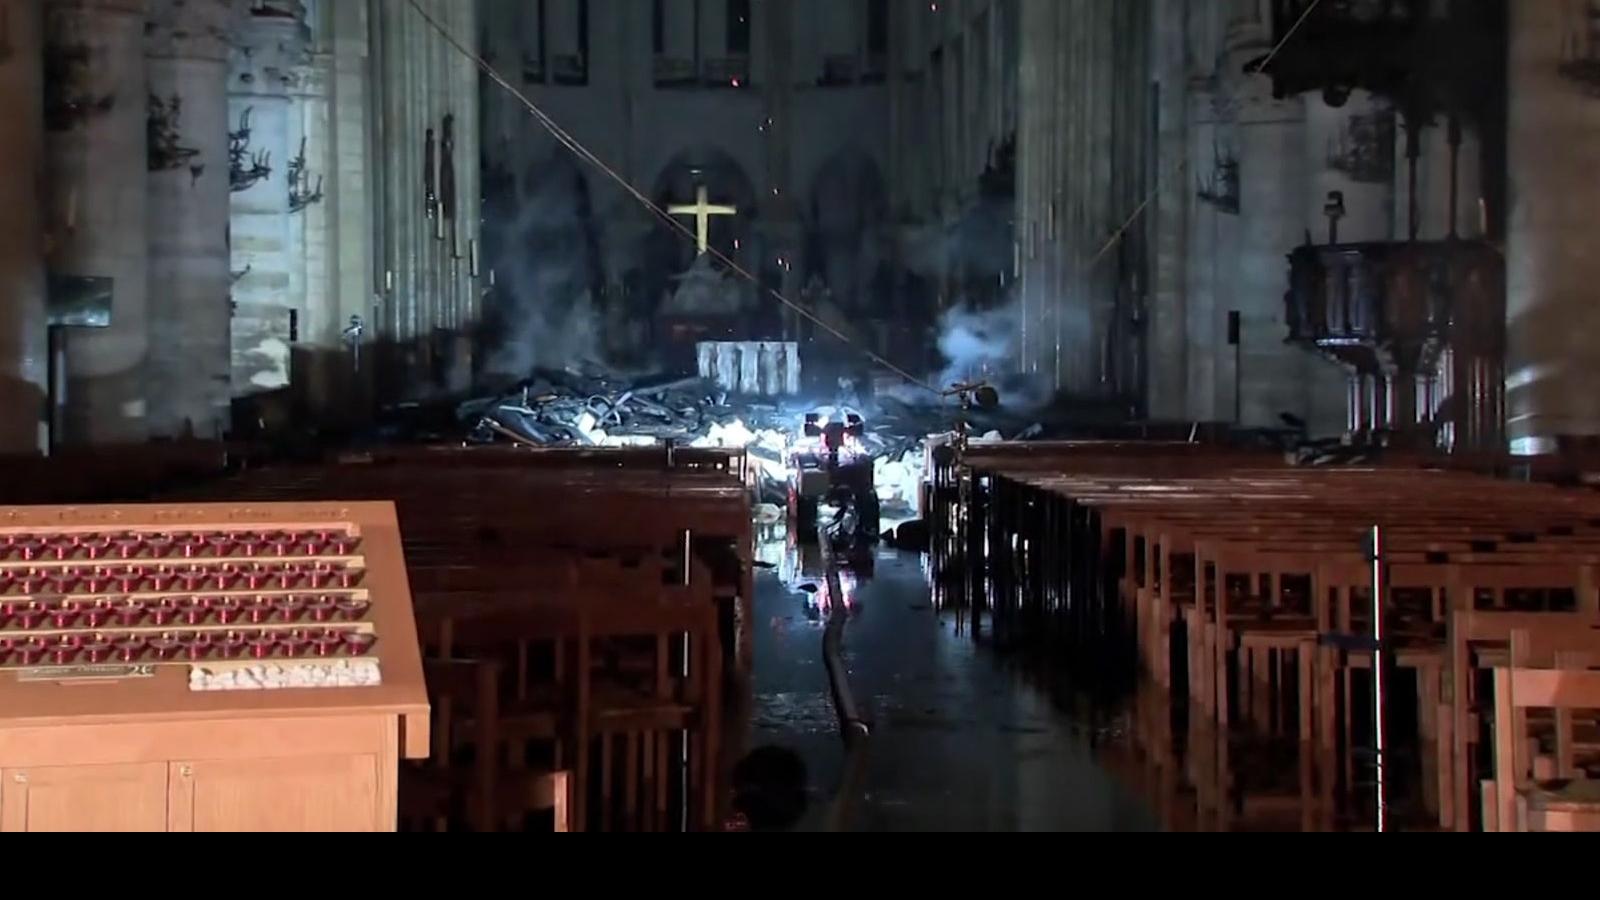 Photos: A first look at some of the damage inside Notre Dame Cathedral in Paris